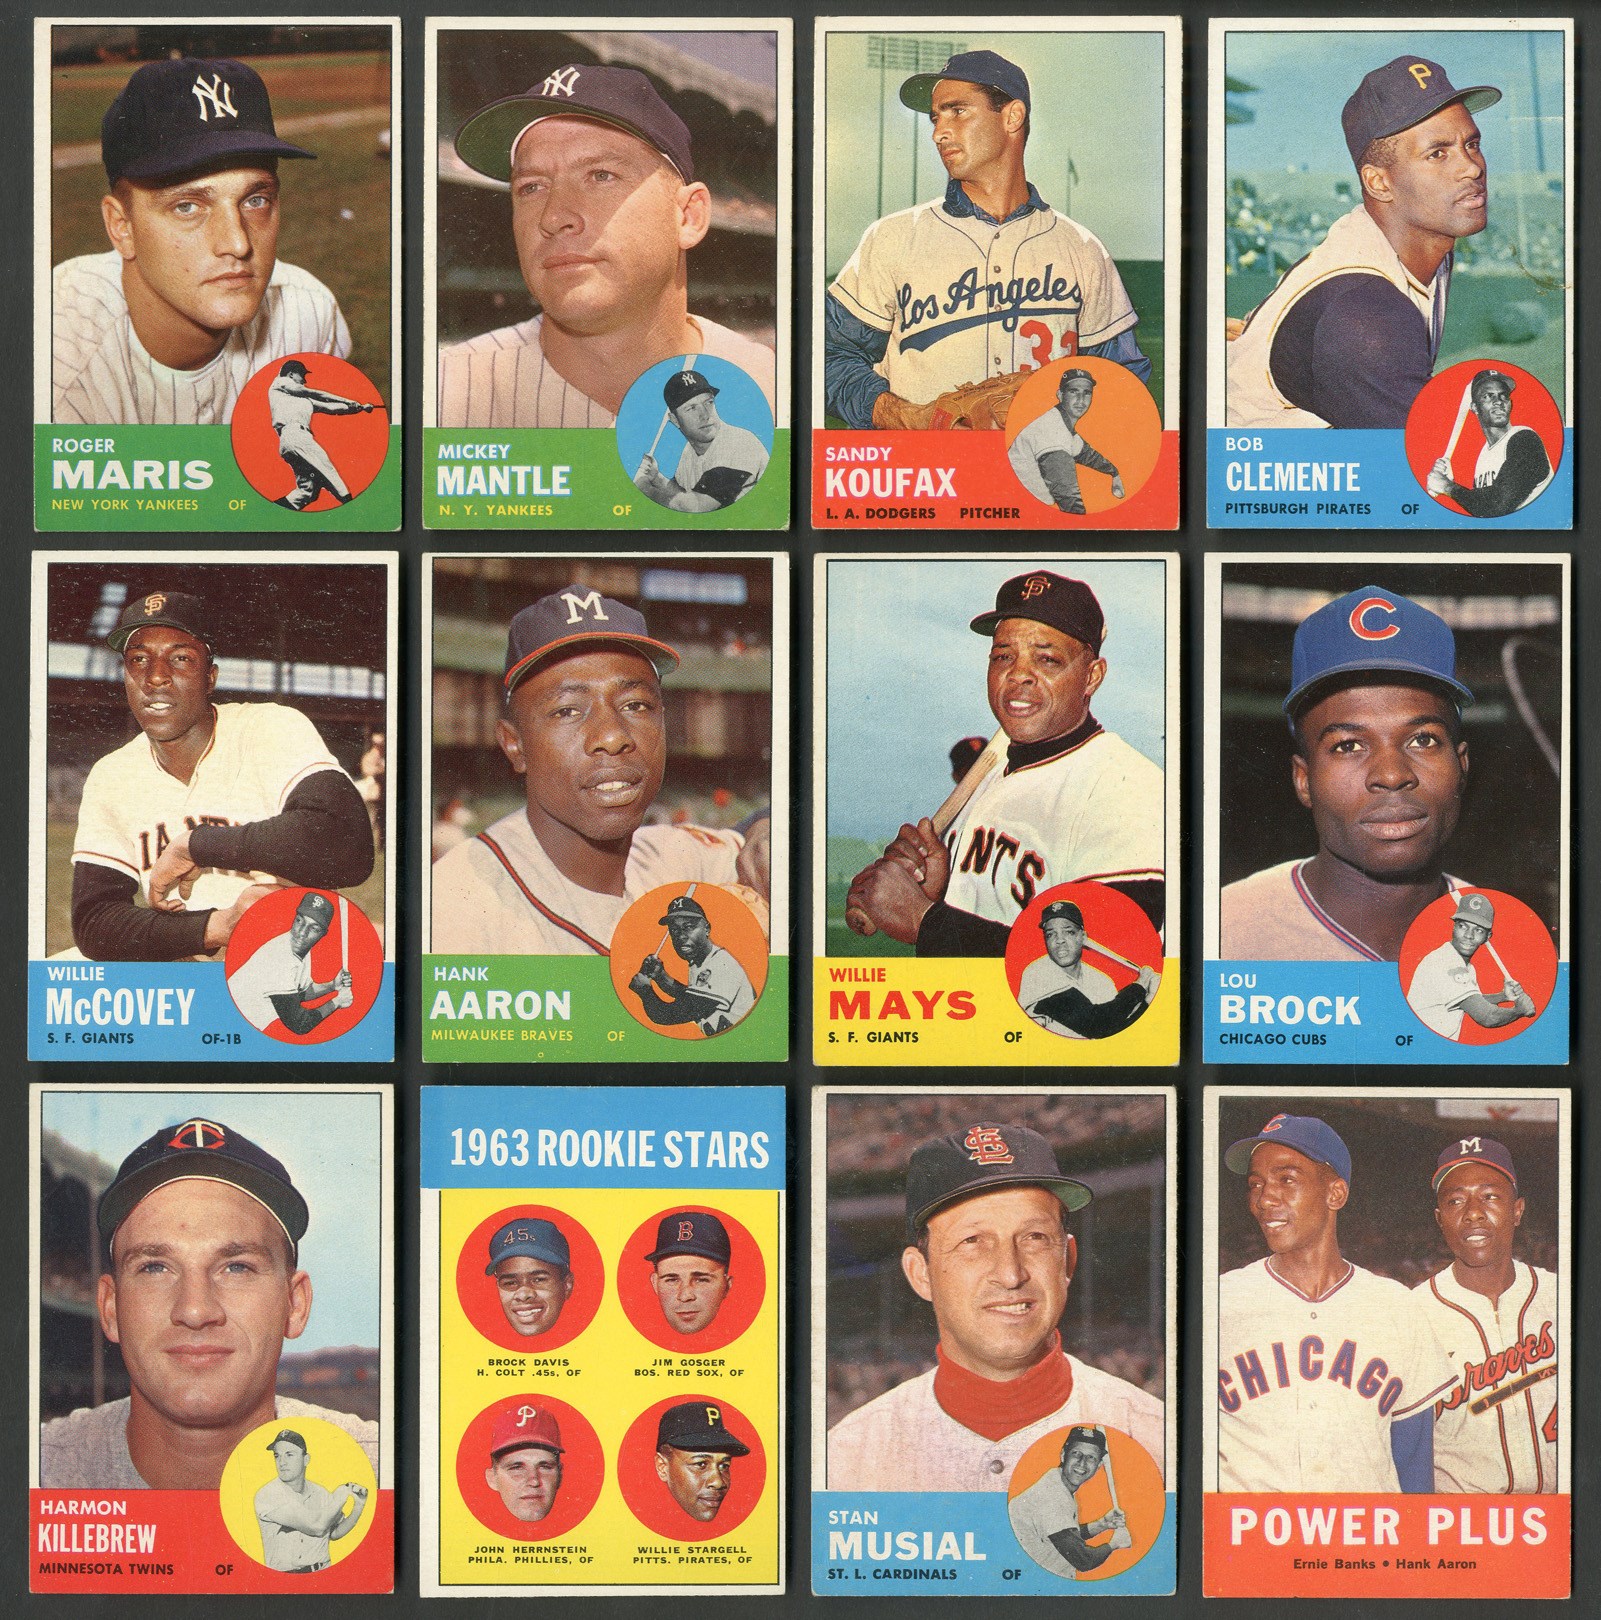 Baseball and Trading Cards - 1963 Topps Complete Set of 576 Cards